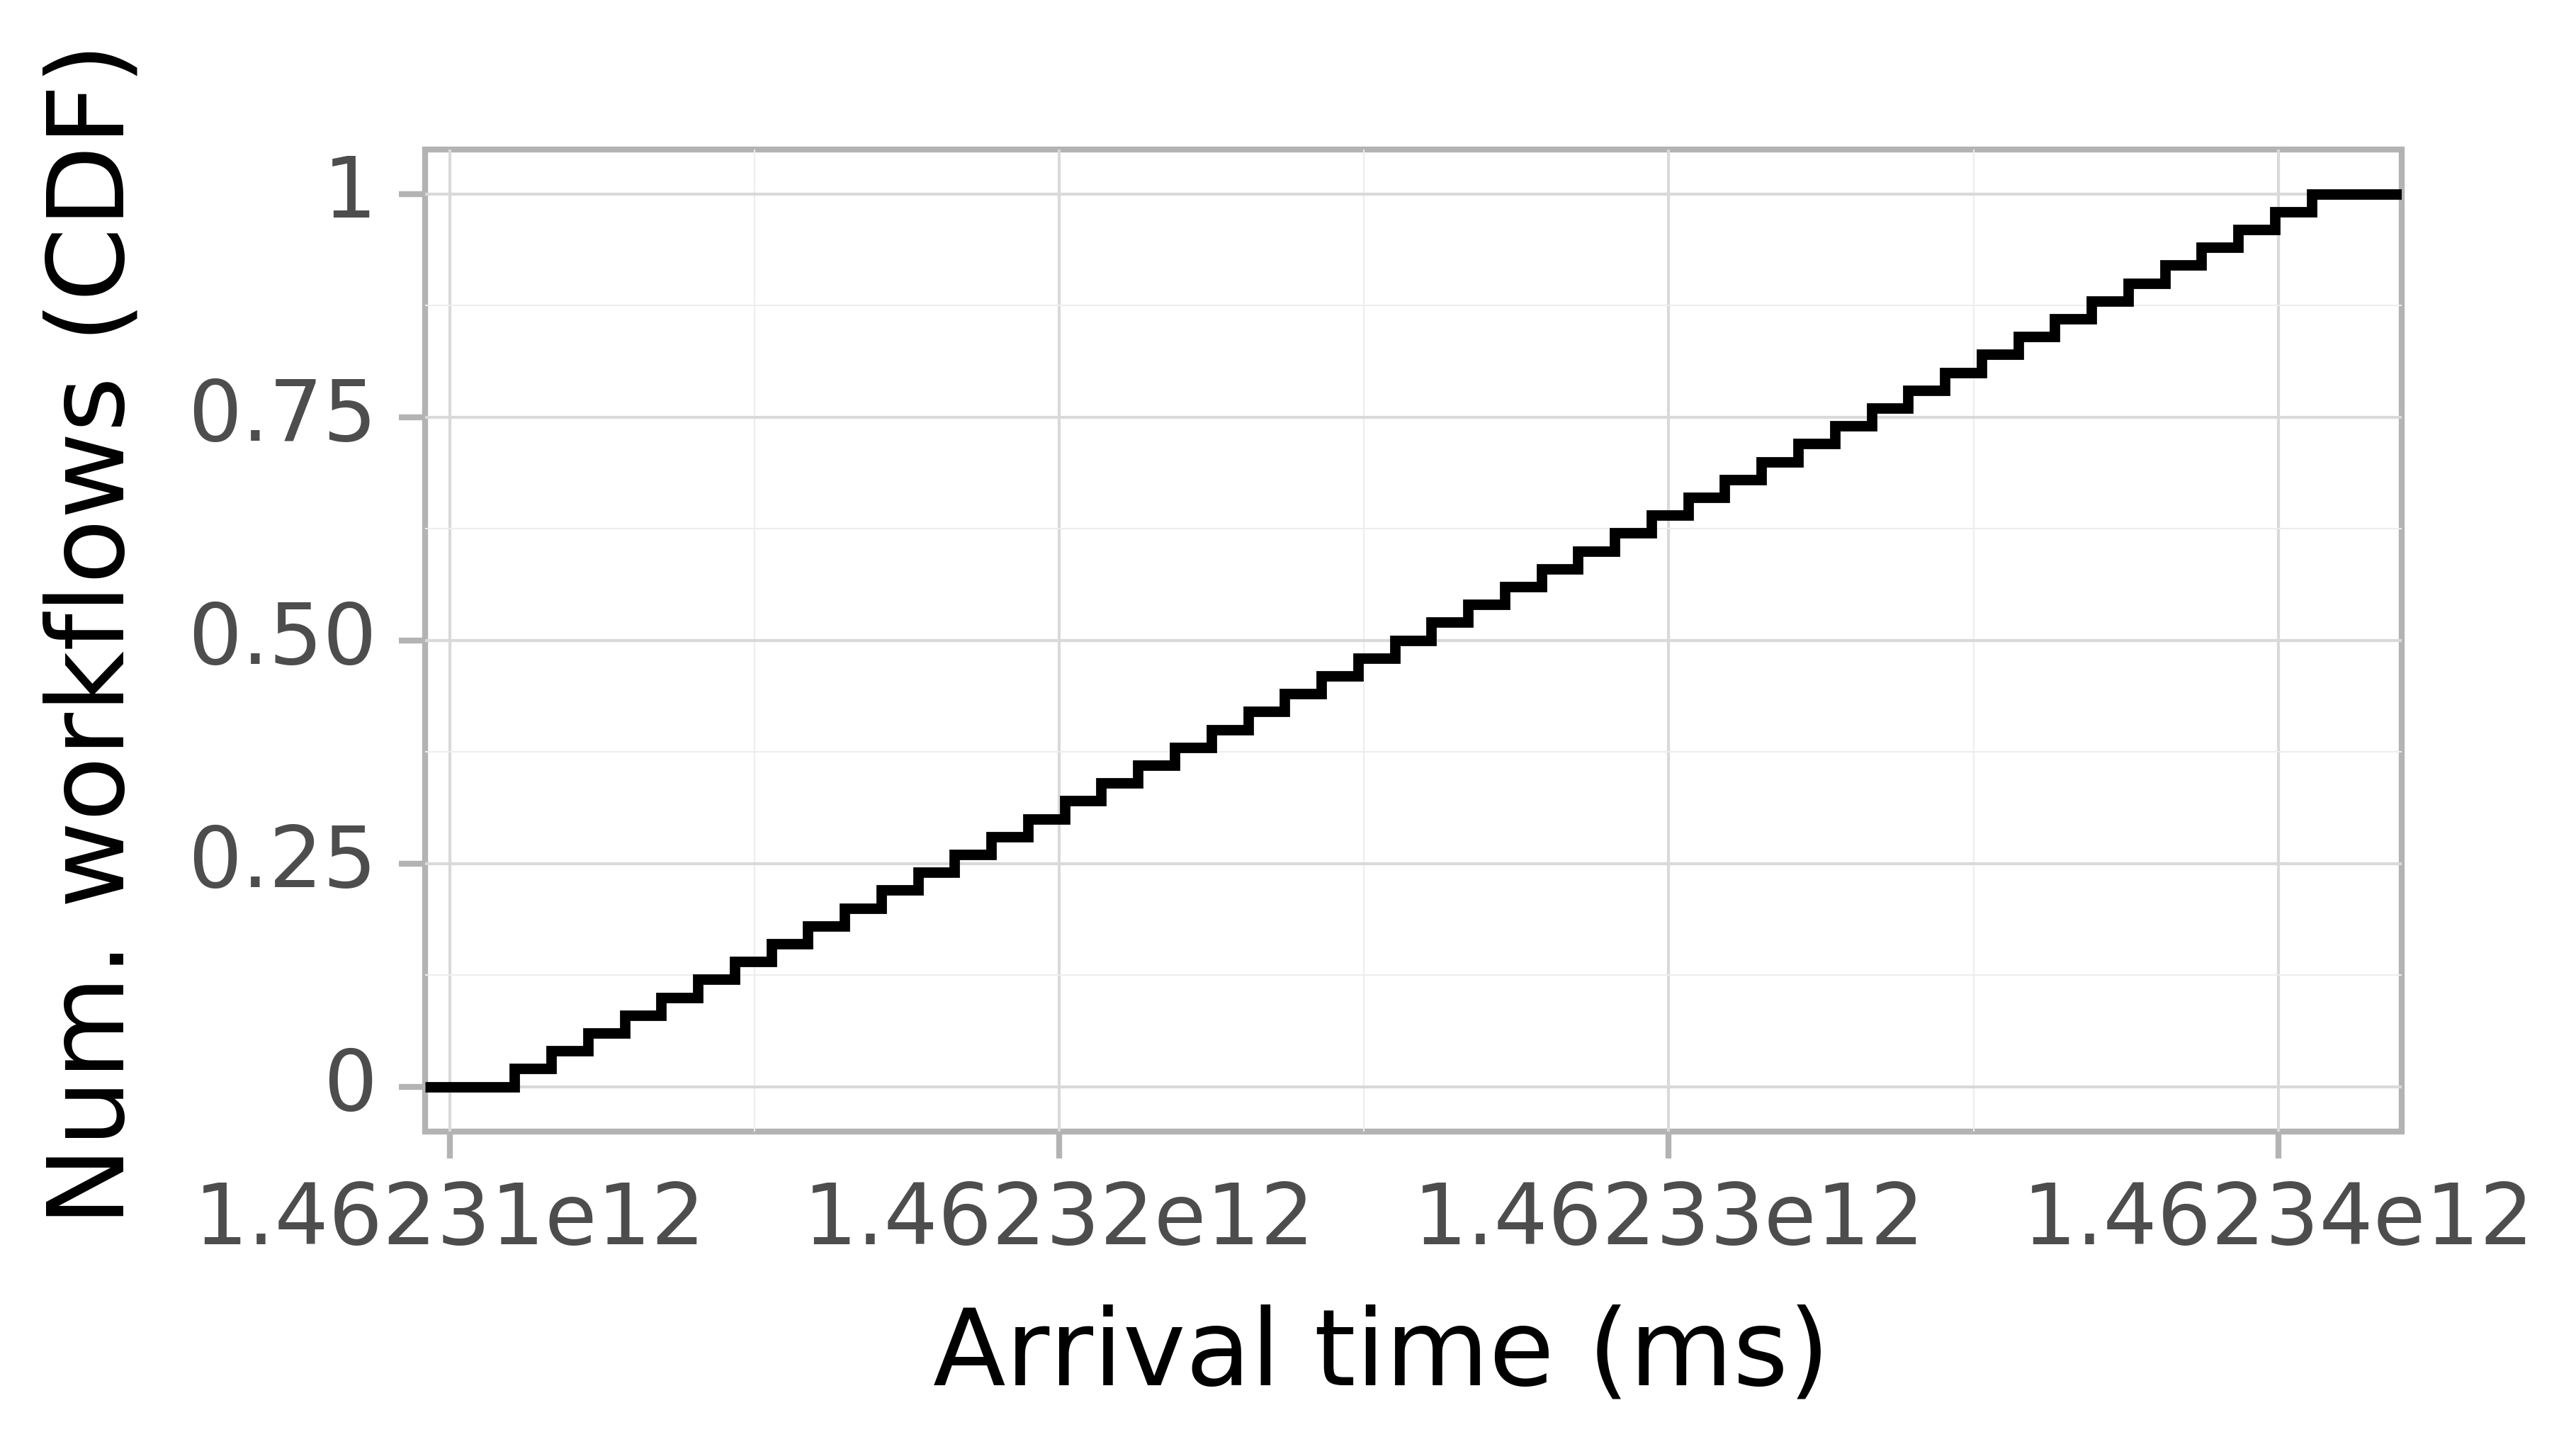 Job arrival CDF graph for the askalon-new_ee50 trace.